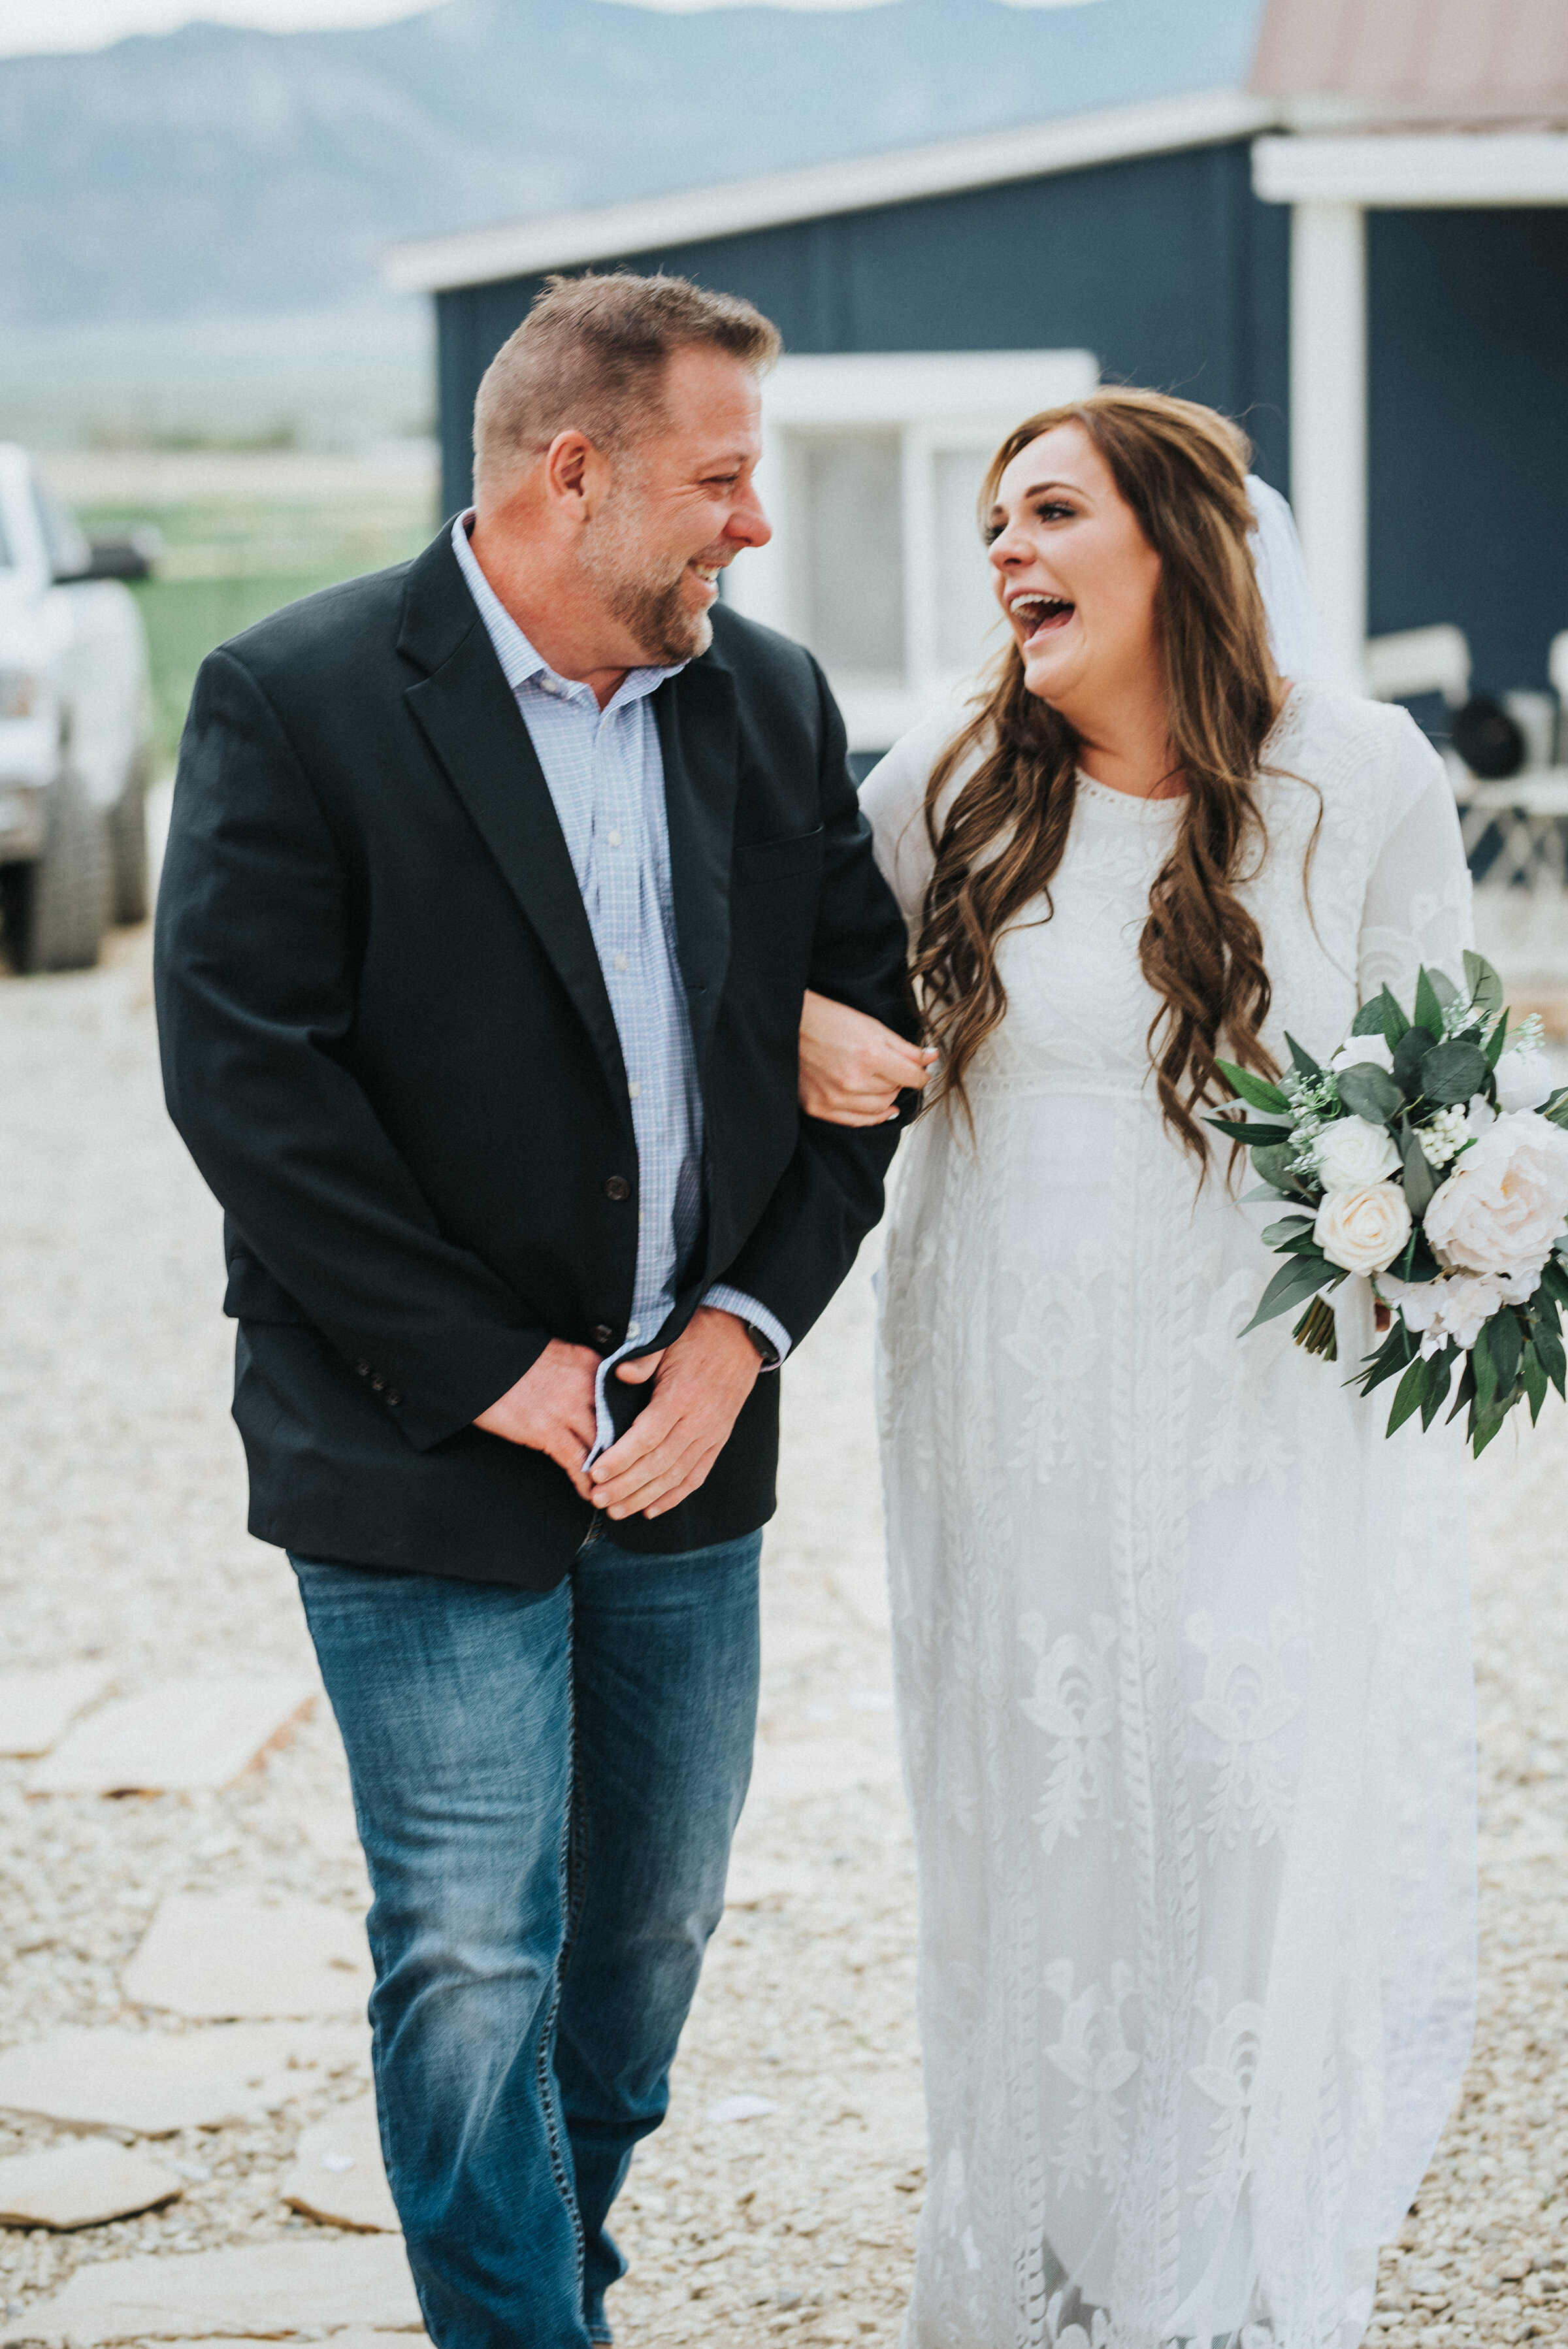  Wedding day walking down the aisle for an intimate outdoor country wedding. photoshoot in Ephraim Utah photography wedding outdoor location western inspired rustic Airbnb photo aesthetic #ephraimutah #utahphotography #weddingdayphotography #gettingmarried #rusticwedding #utahwedding #westernstyle #weddingphotoshoot 